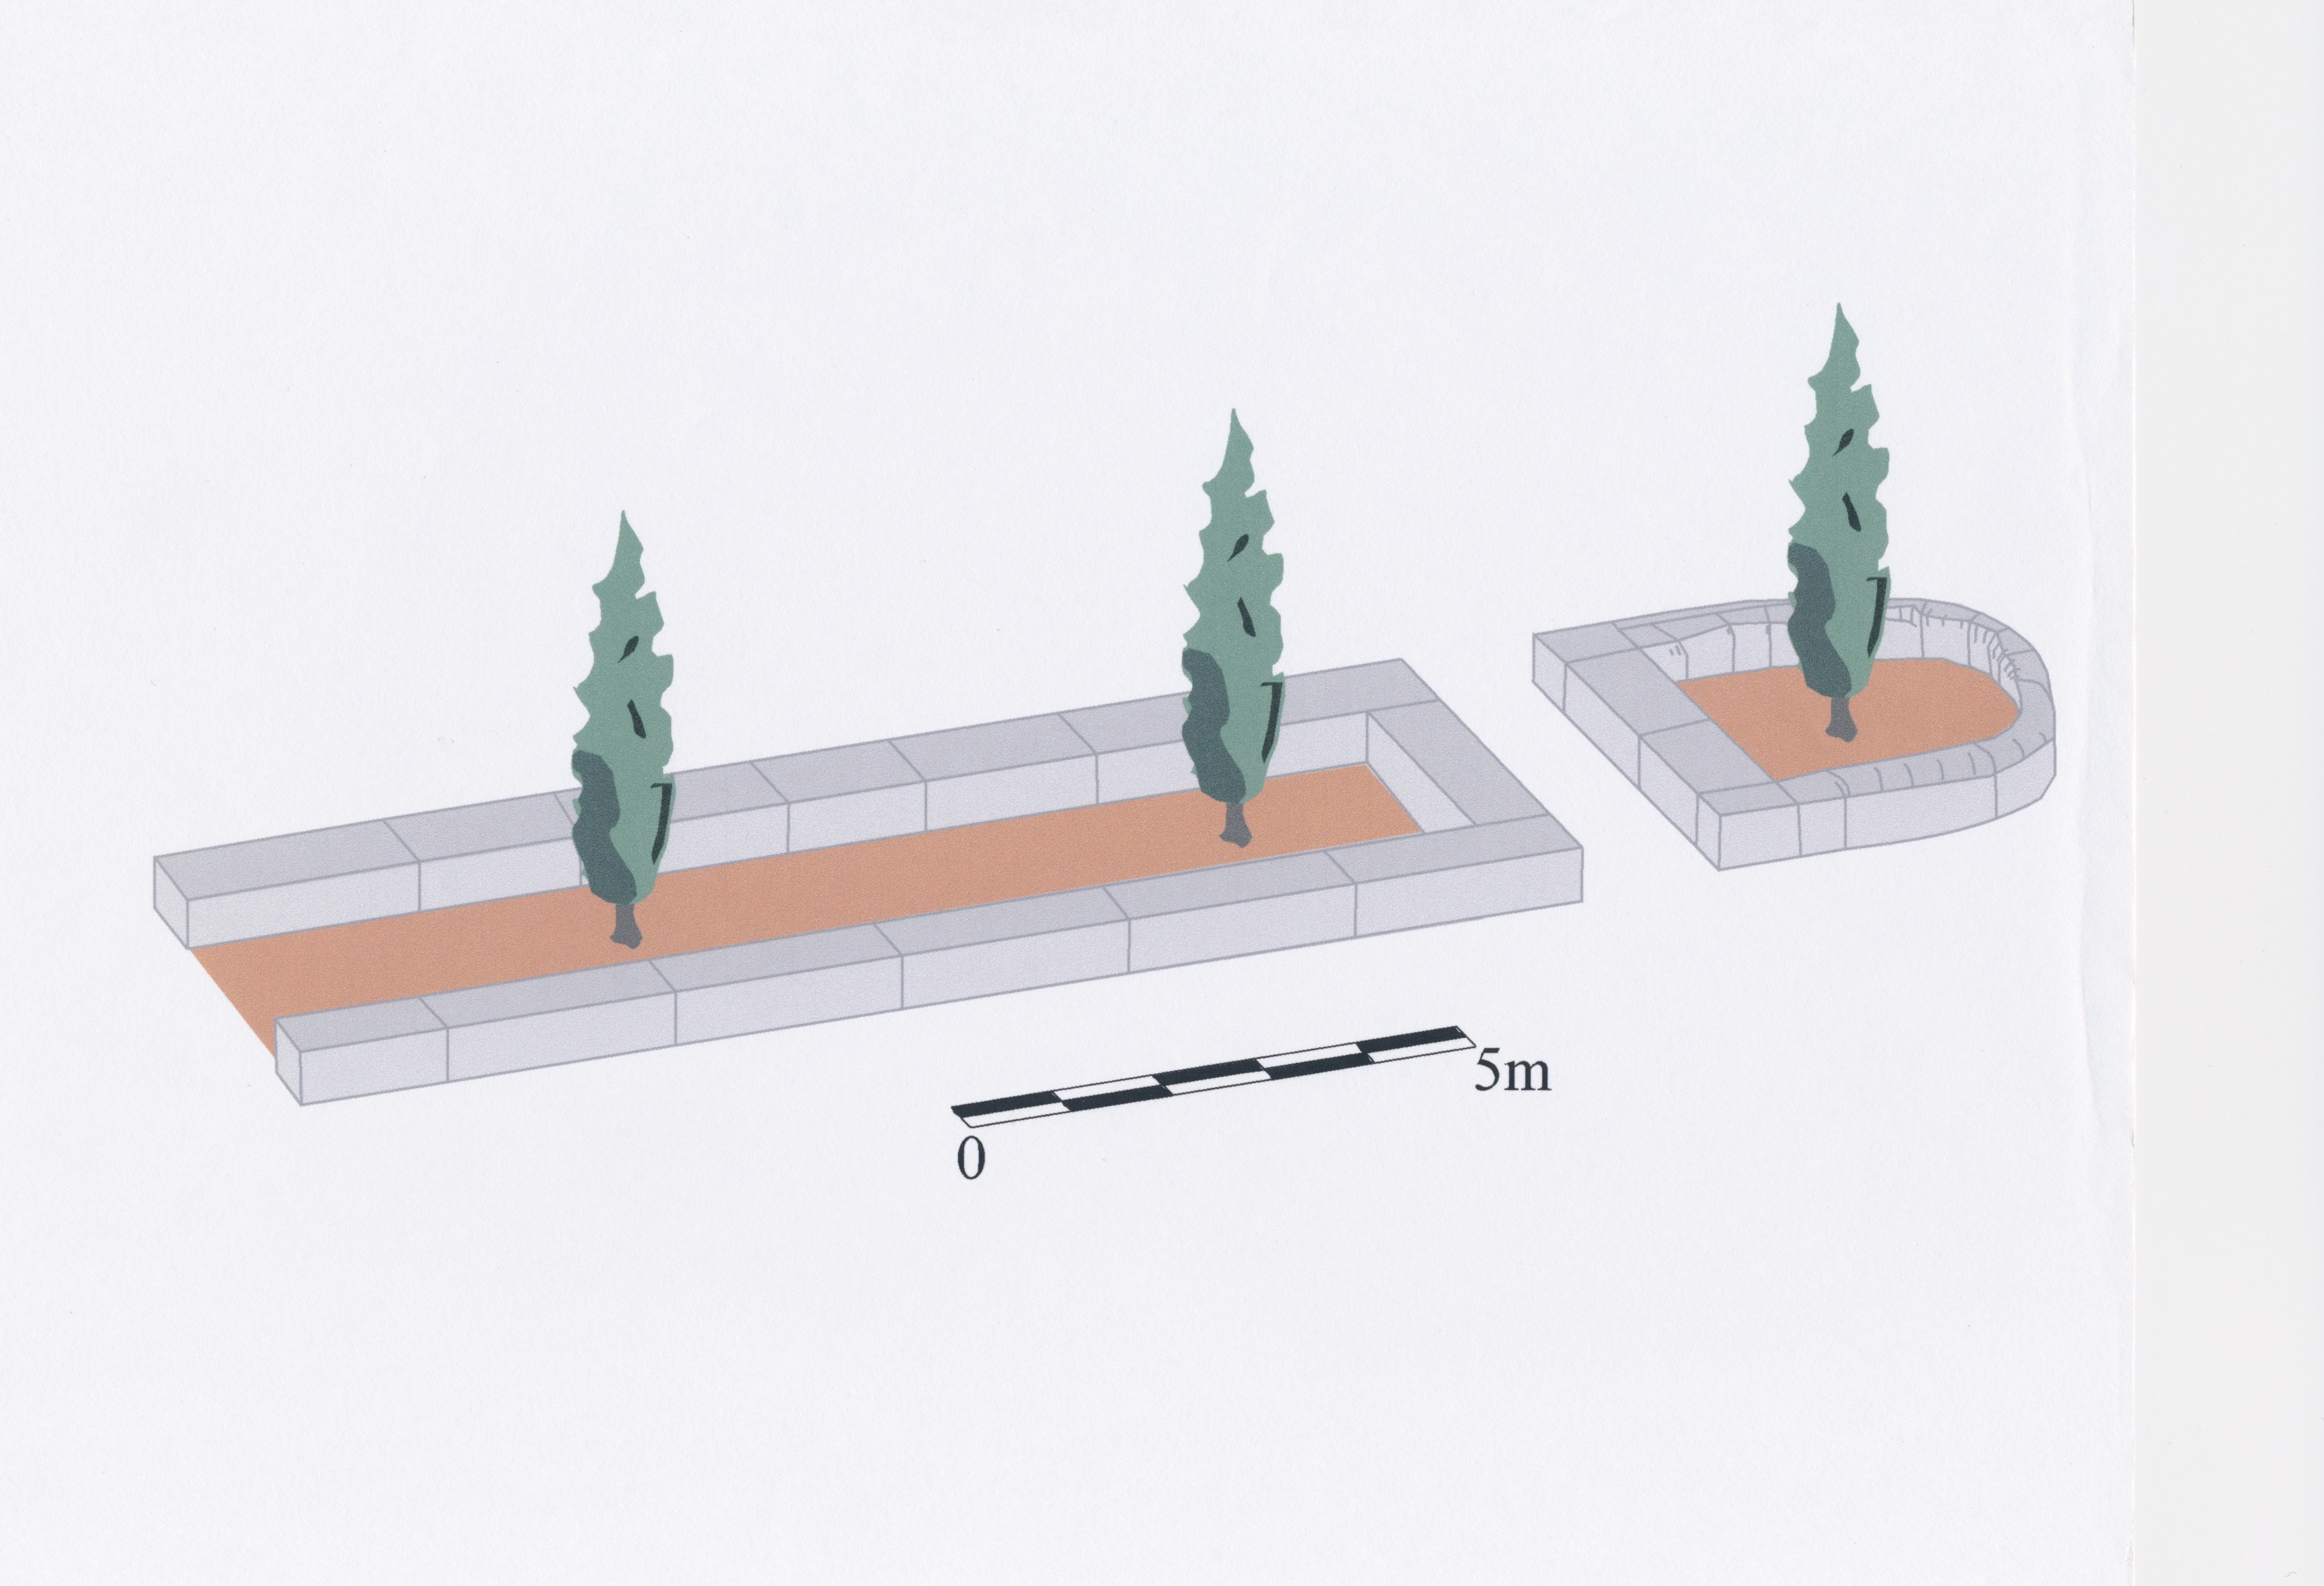 reconstruction drawing of the Roman circus with hypothetical cypress trees planted in the spina and meta